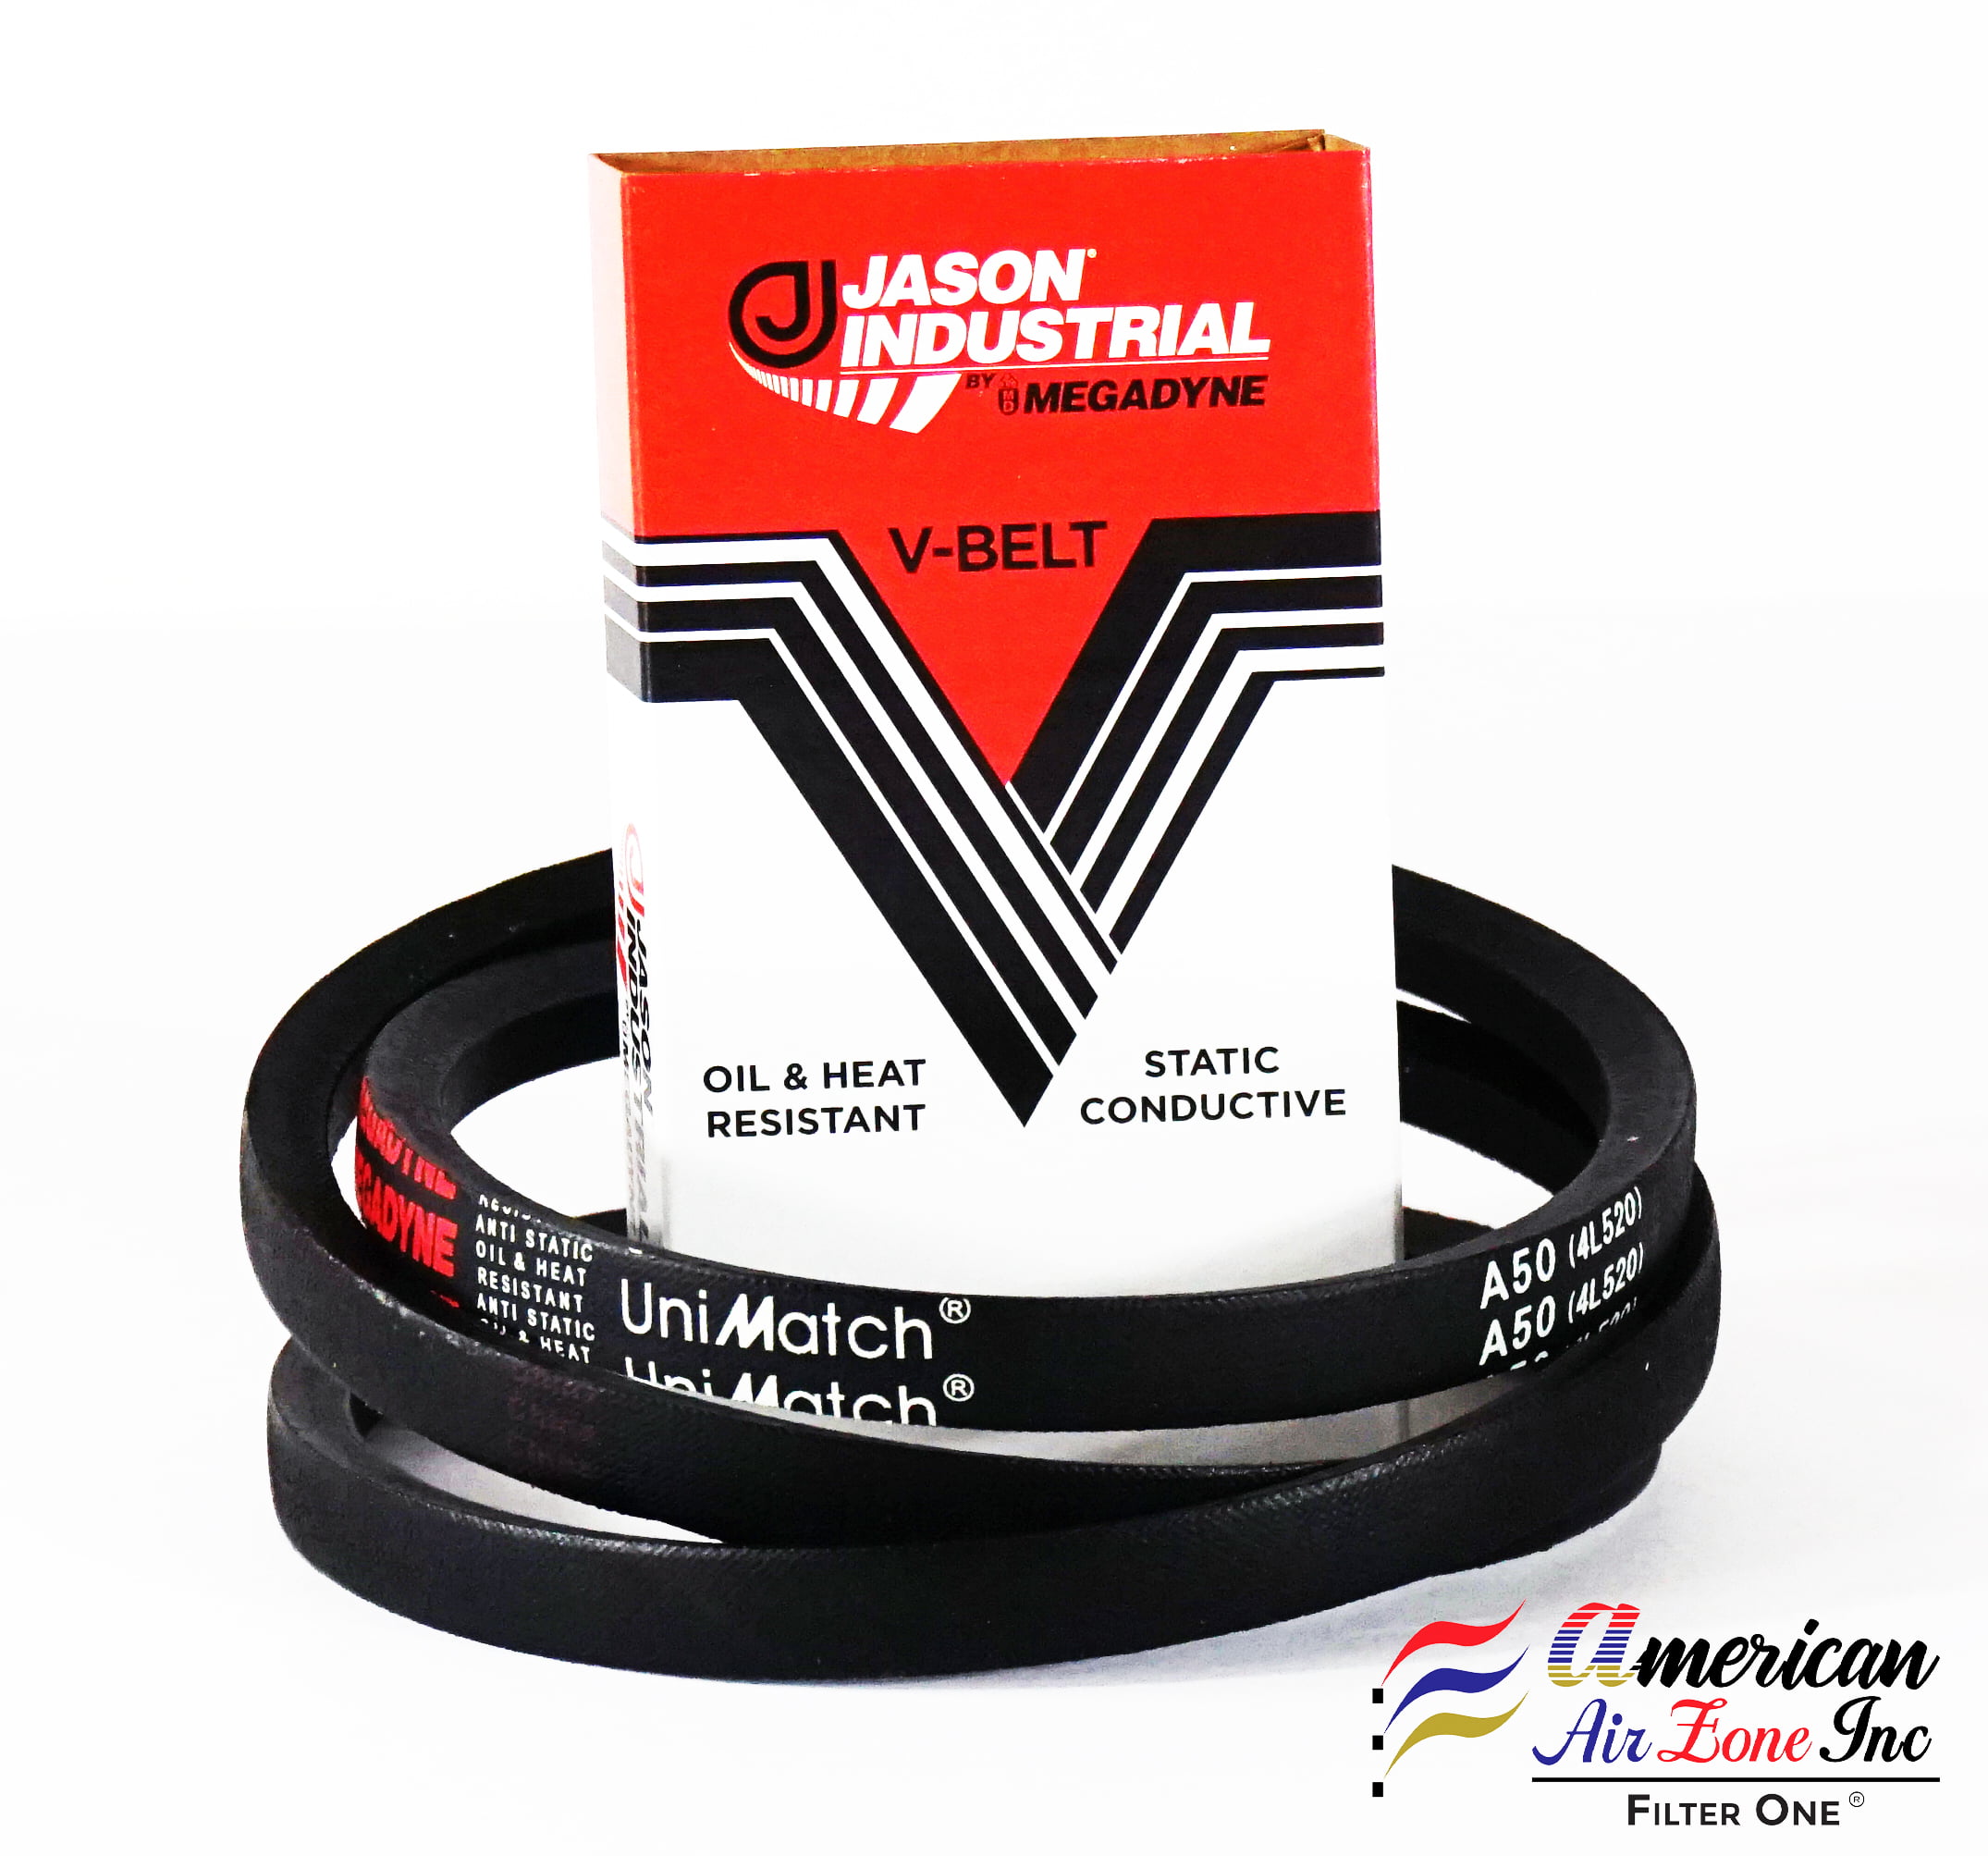 Polyester Cord,Heat and Oil Resistant 5L420 Premium 5/8 X 42" V Belt Wrapped 